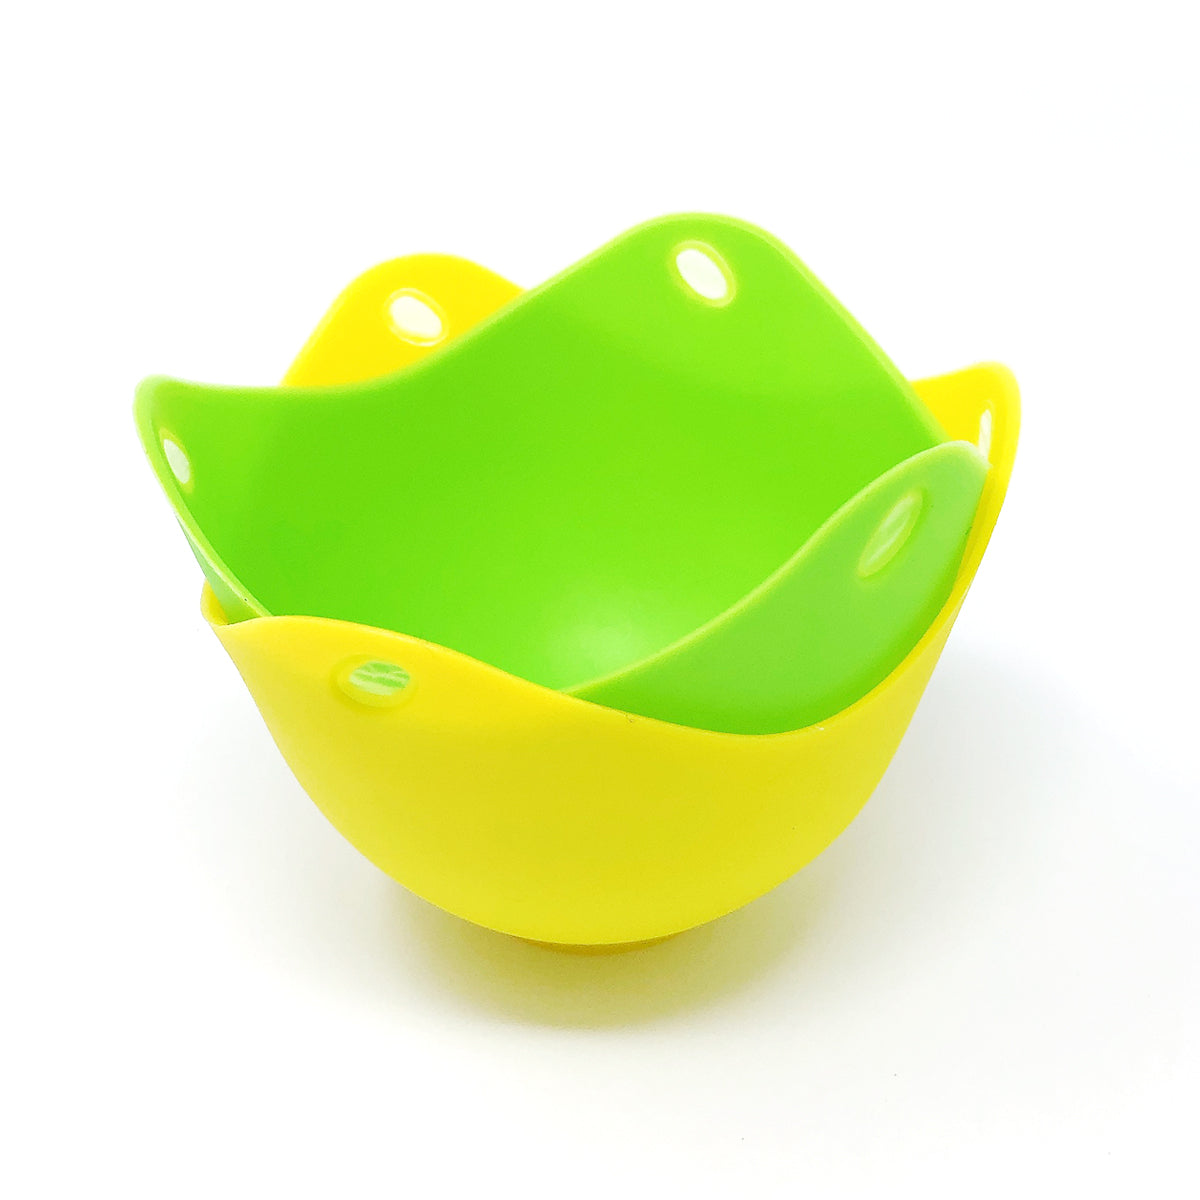 Non-stick Silicone Egg Cup, High Temperature Resistant Steamed Egg